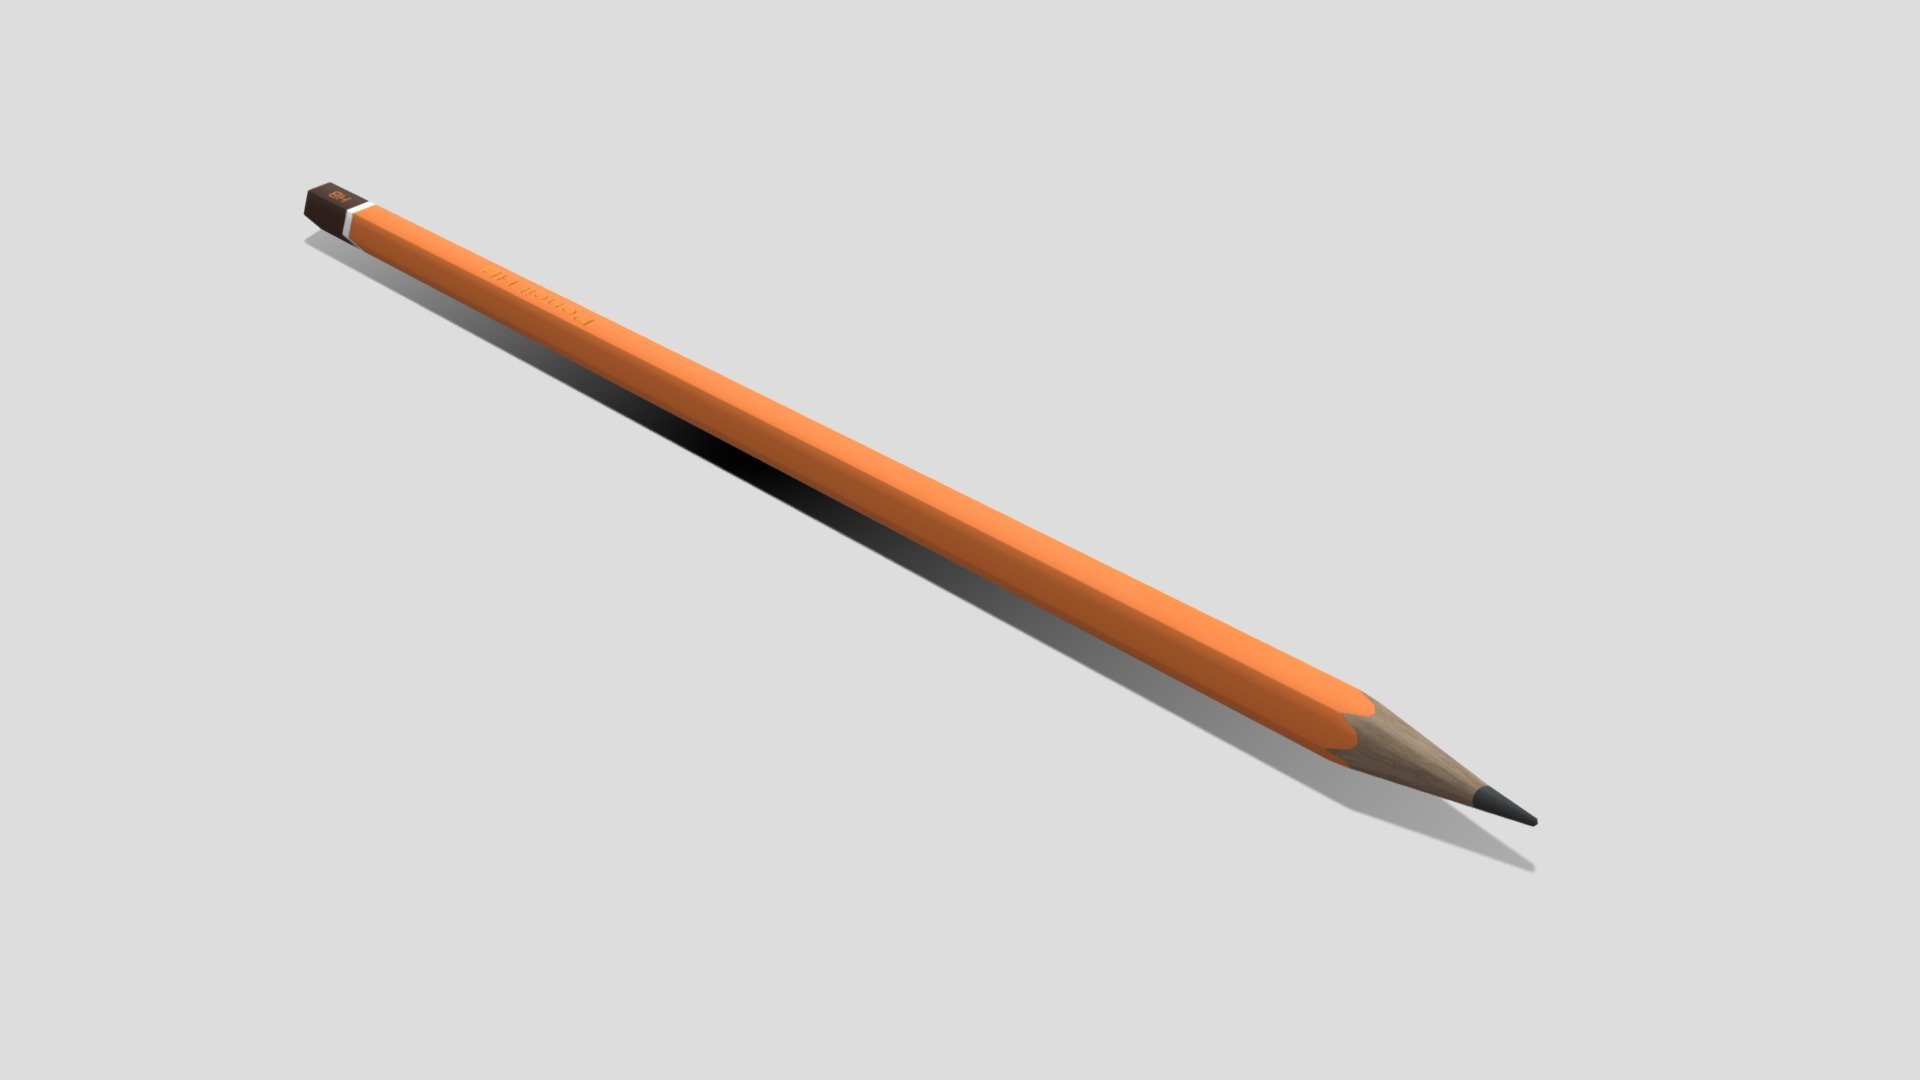 Hi all,
This is PBR Pencil HB. The file includes a model in real world scale (15cm x 0.5cm x 0.5cm).
The product has 270 polygons.
It comes in the following formats:
.blend
.fbx
.obj
.dae
.gltf
The Blender file has the shaders set up, so it's ready to render using Cycles.
It also comes with set of 2K .png maps:
base color
roughness
normal
metallic - Pencil HB - Buy Royalty Free 3D model by kambur 3d model